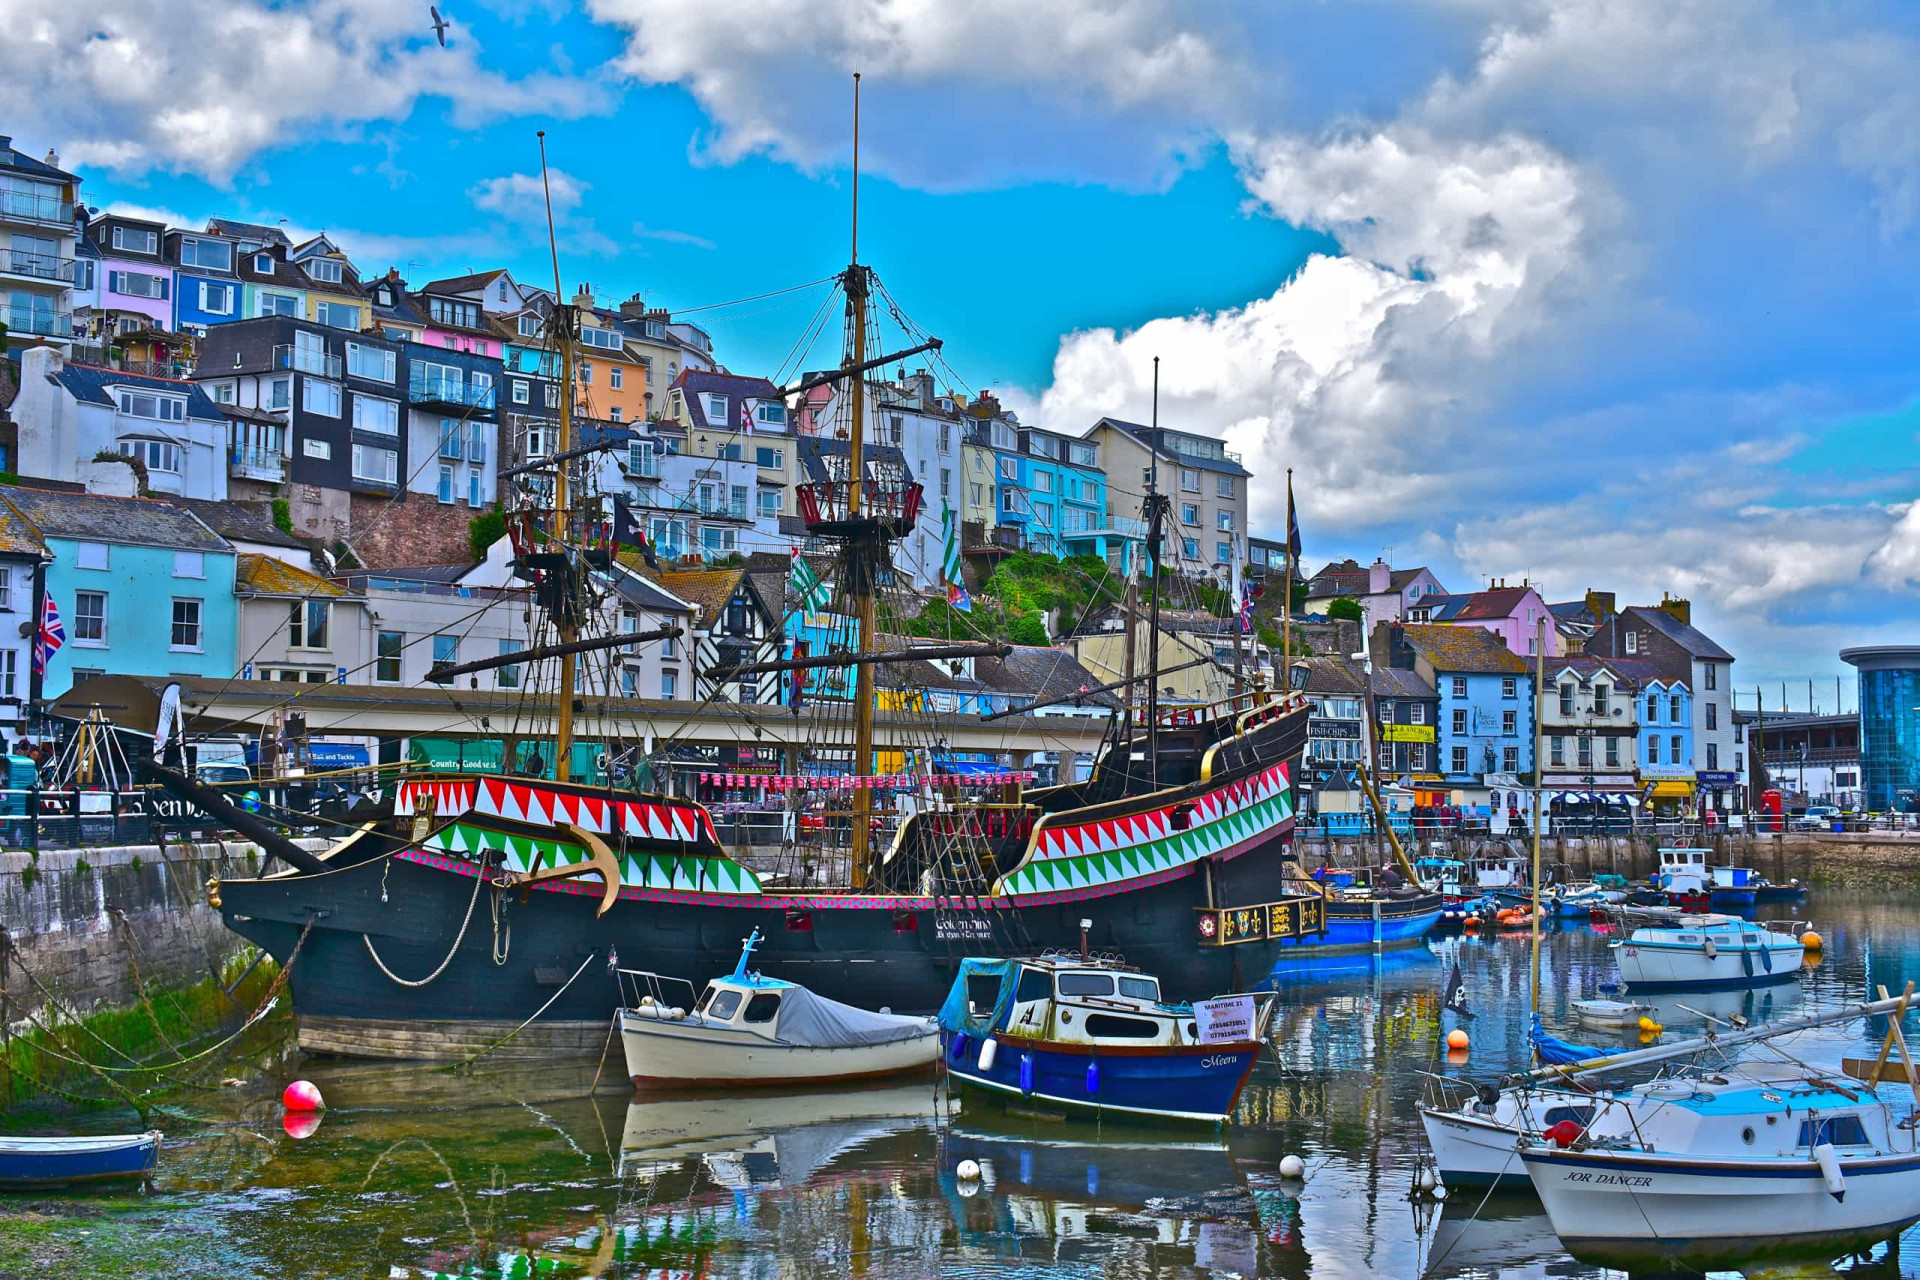 <p>Brixham in Devon is situated in what is now called the "English Riviera." It offers wonderful insight into what a true fishing town is like, as well as providing lovely hotels and restaurants.</p><p>You may also like:<a href="https://www.starsinsider.com/n/363011?utm_source=msn.com&utm_medium=display&utm_campaign=referral_description&utm_content=471299v4en-en"> Stars with questionable personal hygiene</a></p>